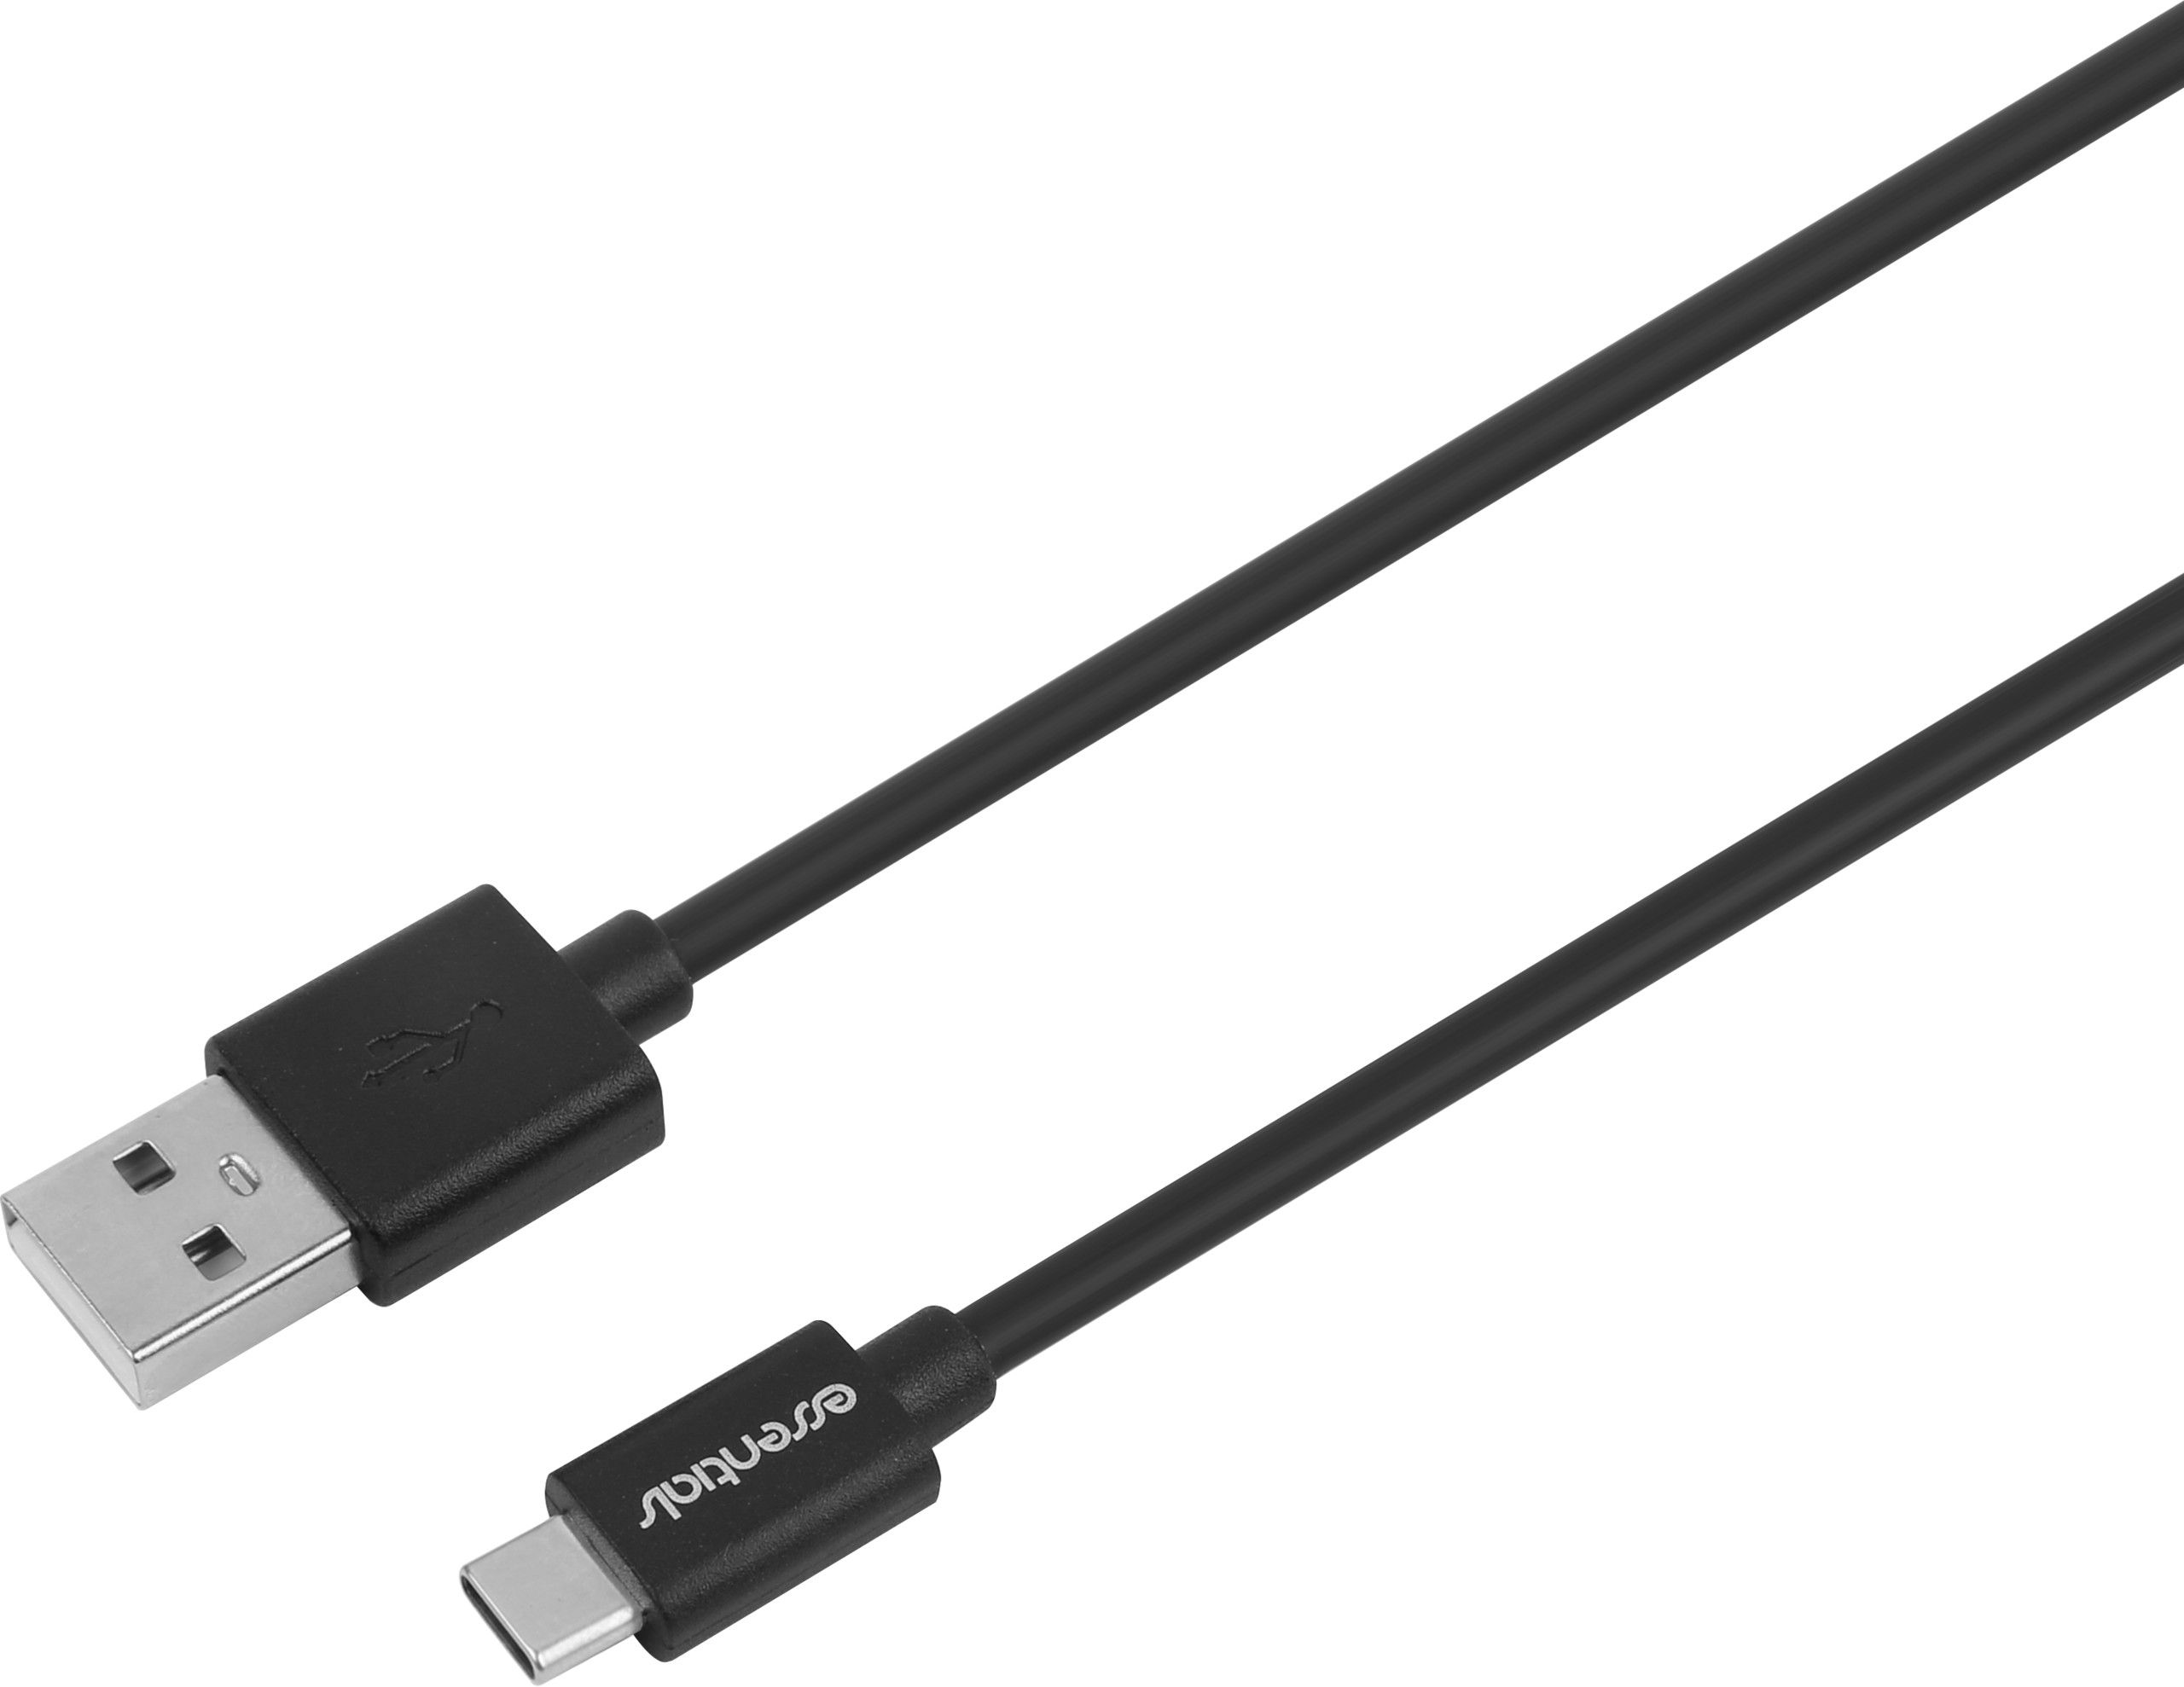 Essentials USB-A to USB-C Cable - 3 meter